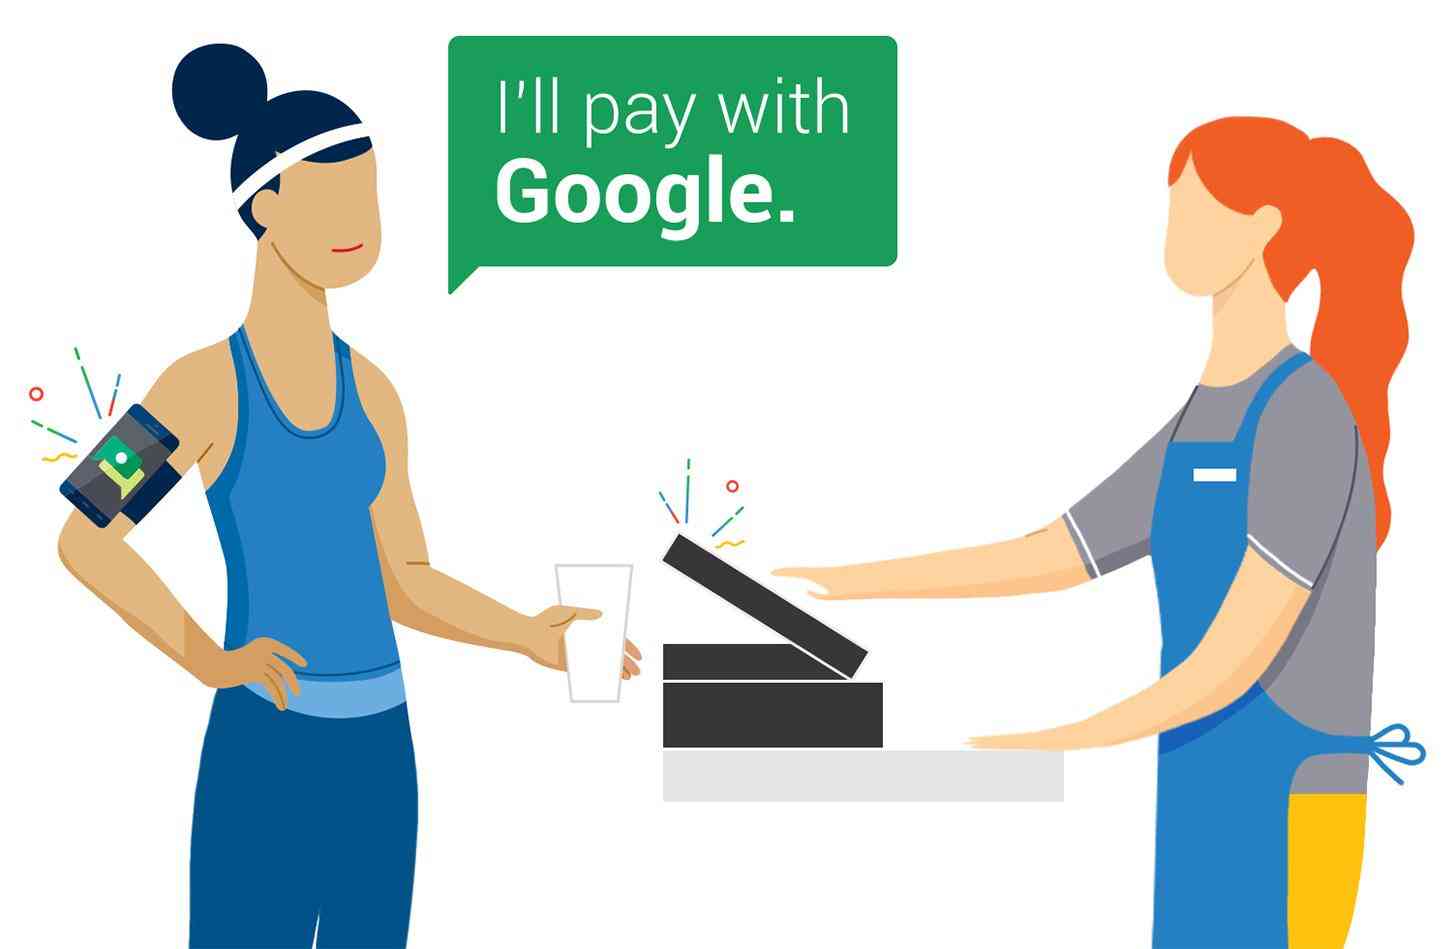 Google Hands Free mobile payment service